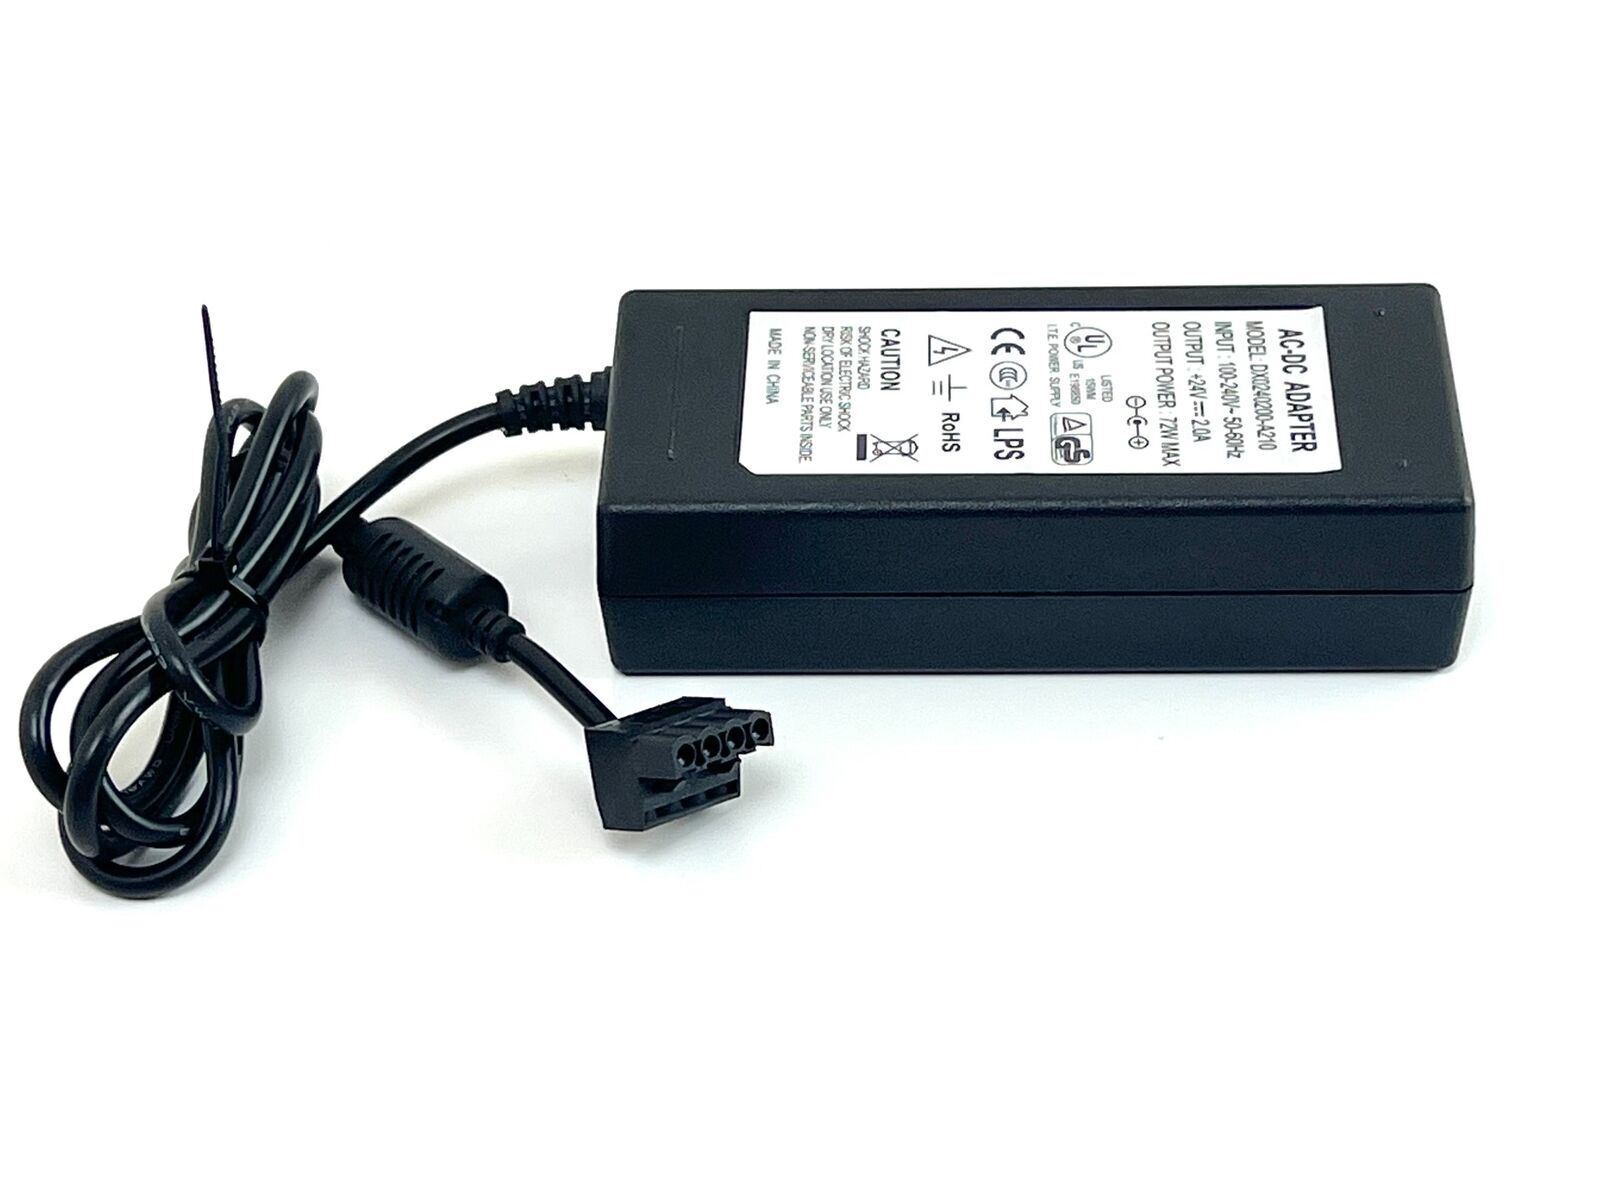 AC-DC Adapter DX0240200-A210 24V 2.0A 72W Genuine Parts Brand Delta Type Power Module Maximum Power Less than 100 W Col